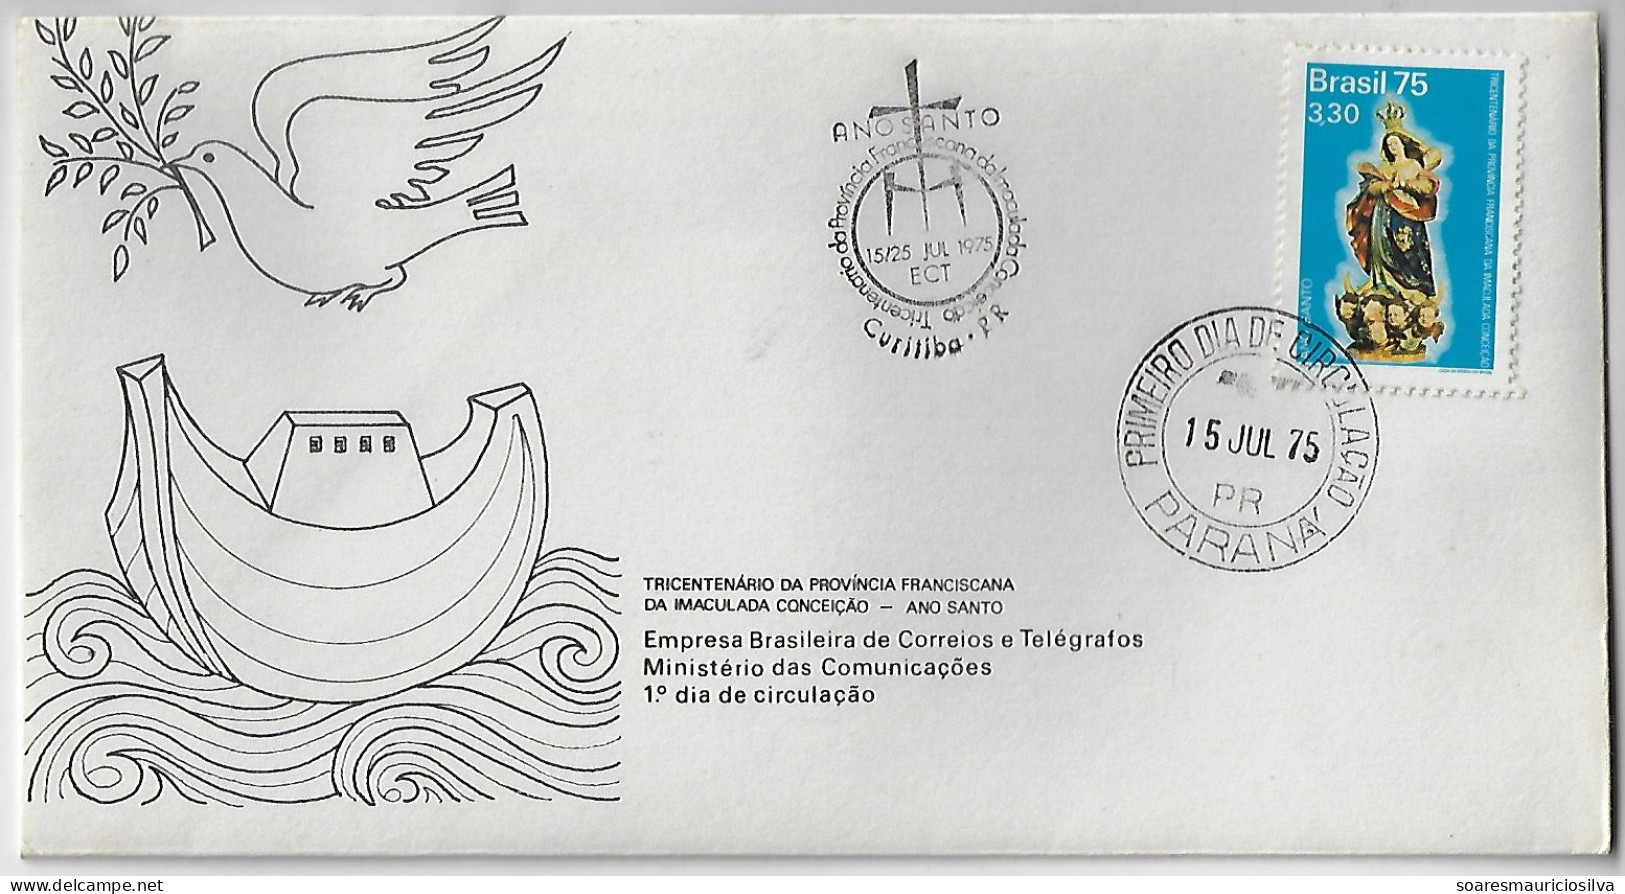 Brazil 1975 First Day Cover FDC Tercentenary Of The Franciscan Province Of The Immaculate Conception Our Lady Maria - FDC